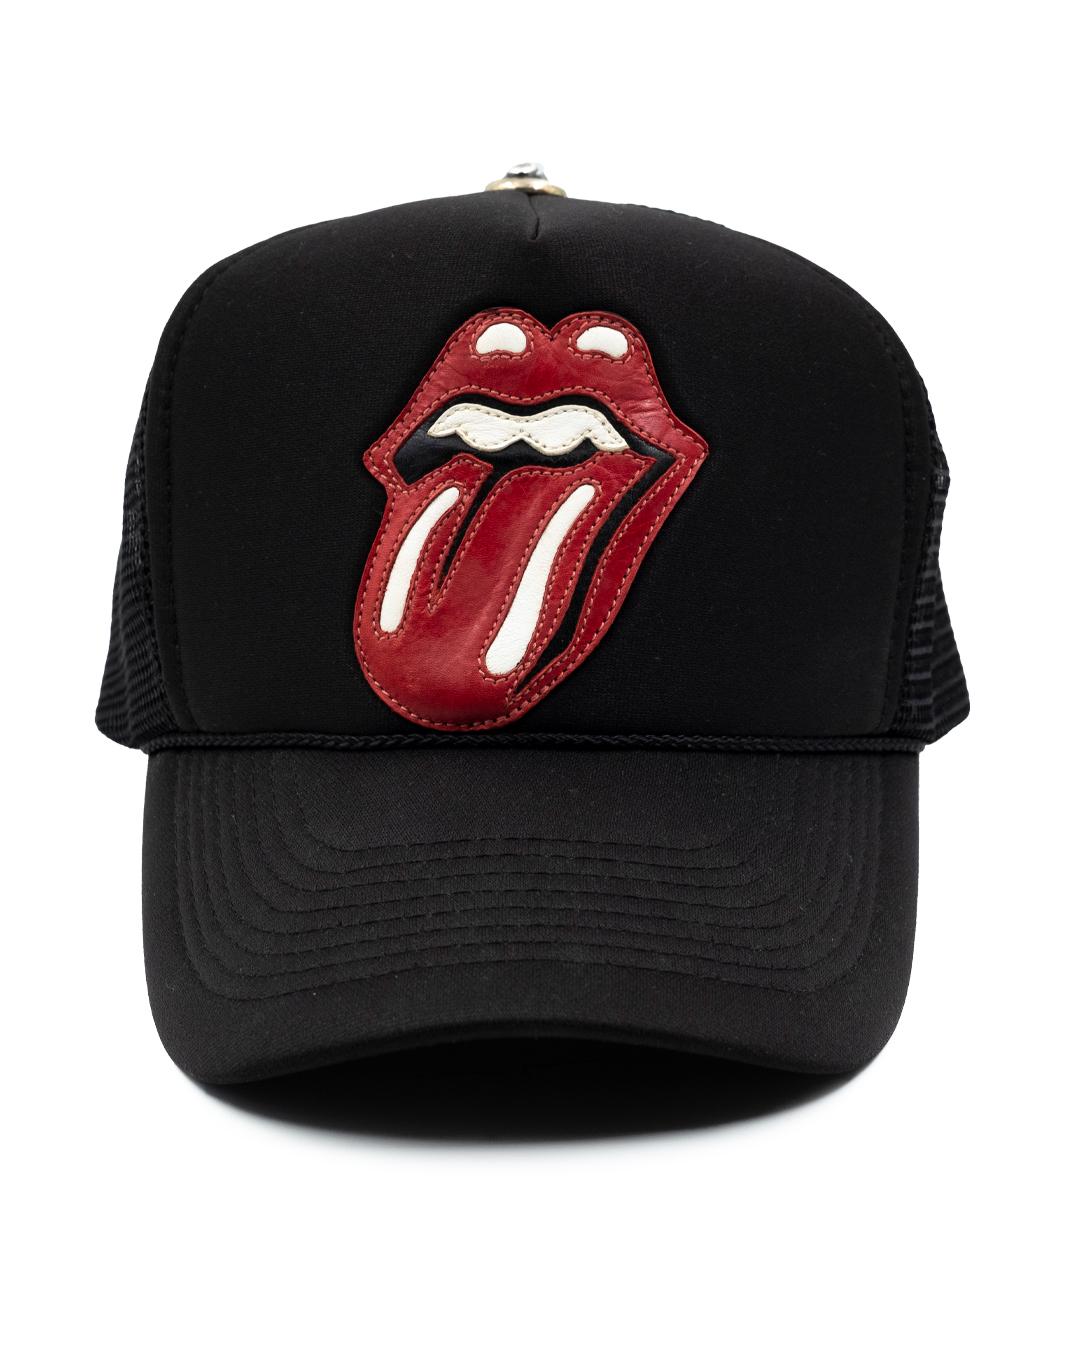 chrome hearts rolling stones hat